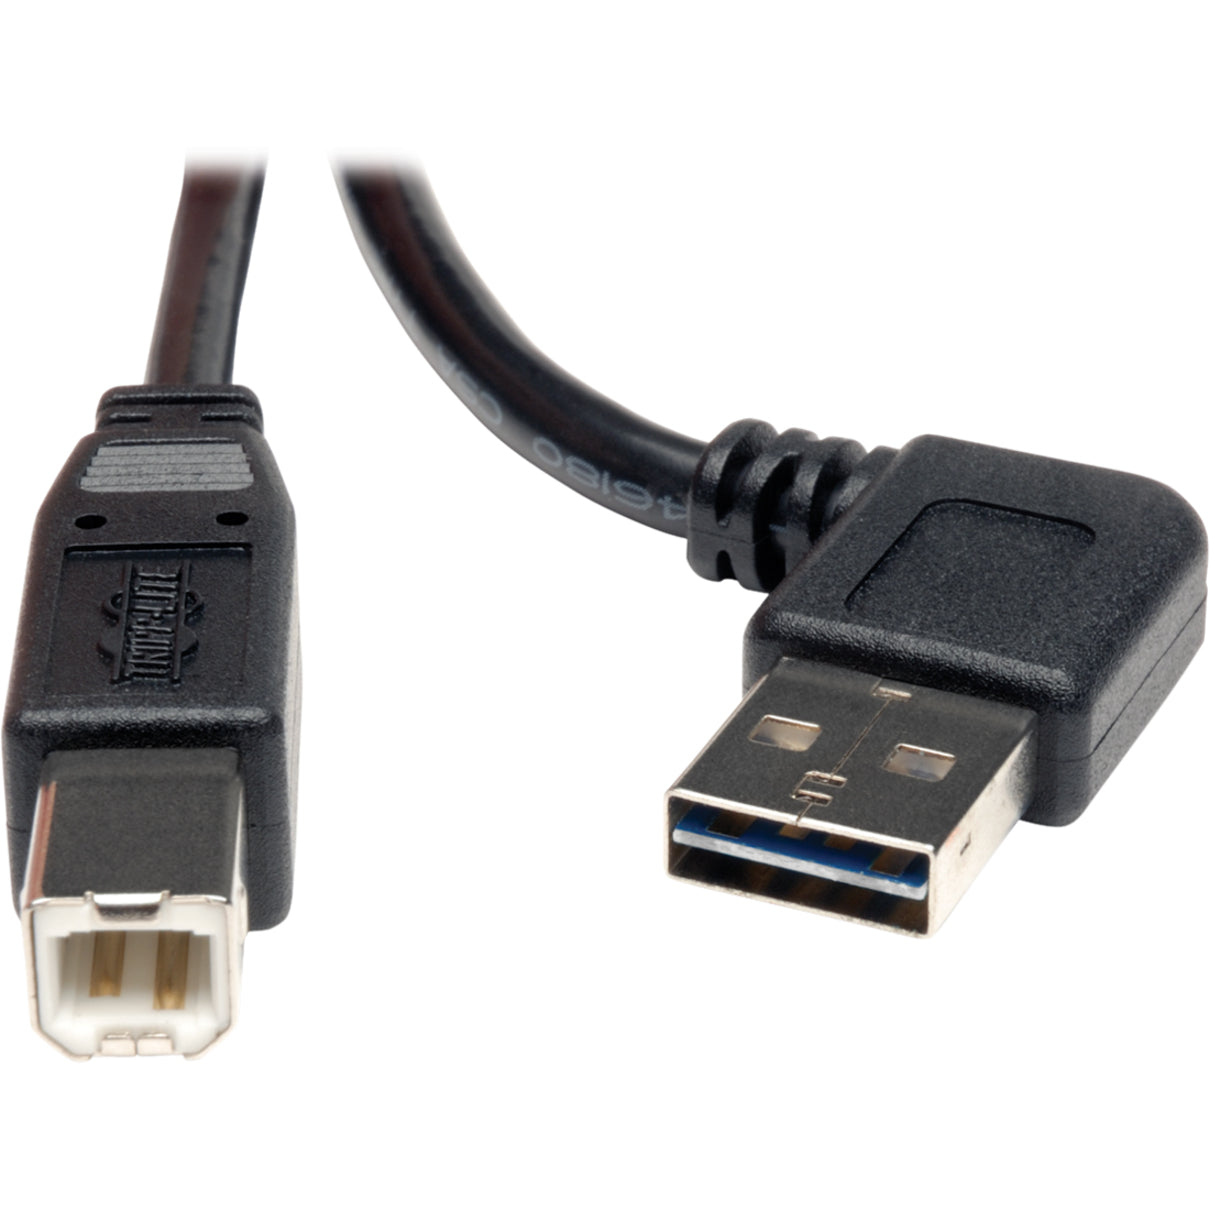 Tripp Lite UR022-003-RA Universal Reversible USB 2.0 Right Angle A-Male to B-Male Device Cable, 3ft